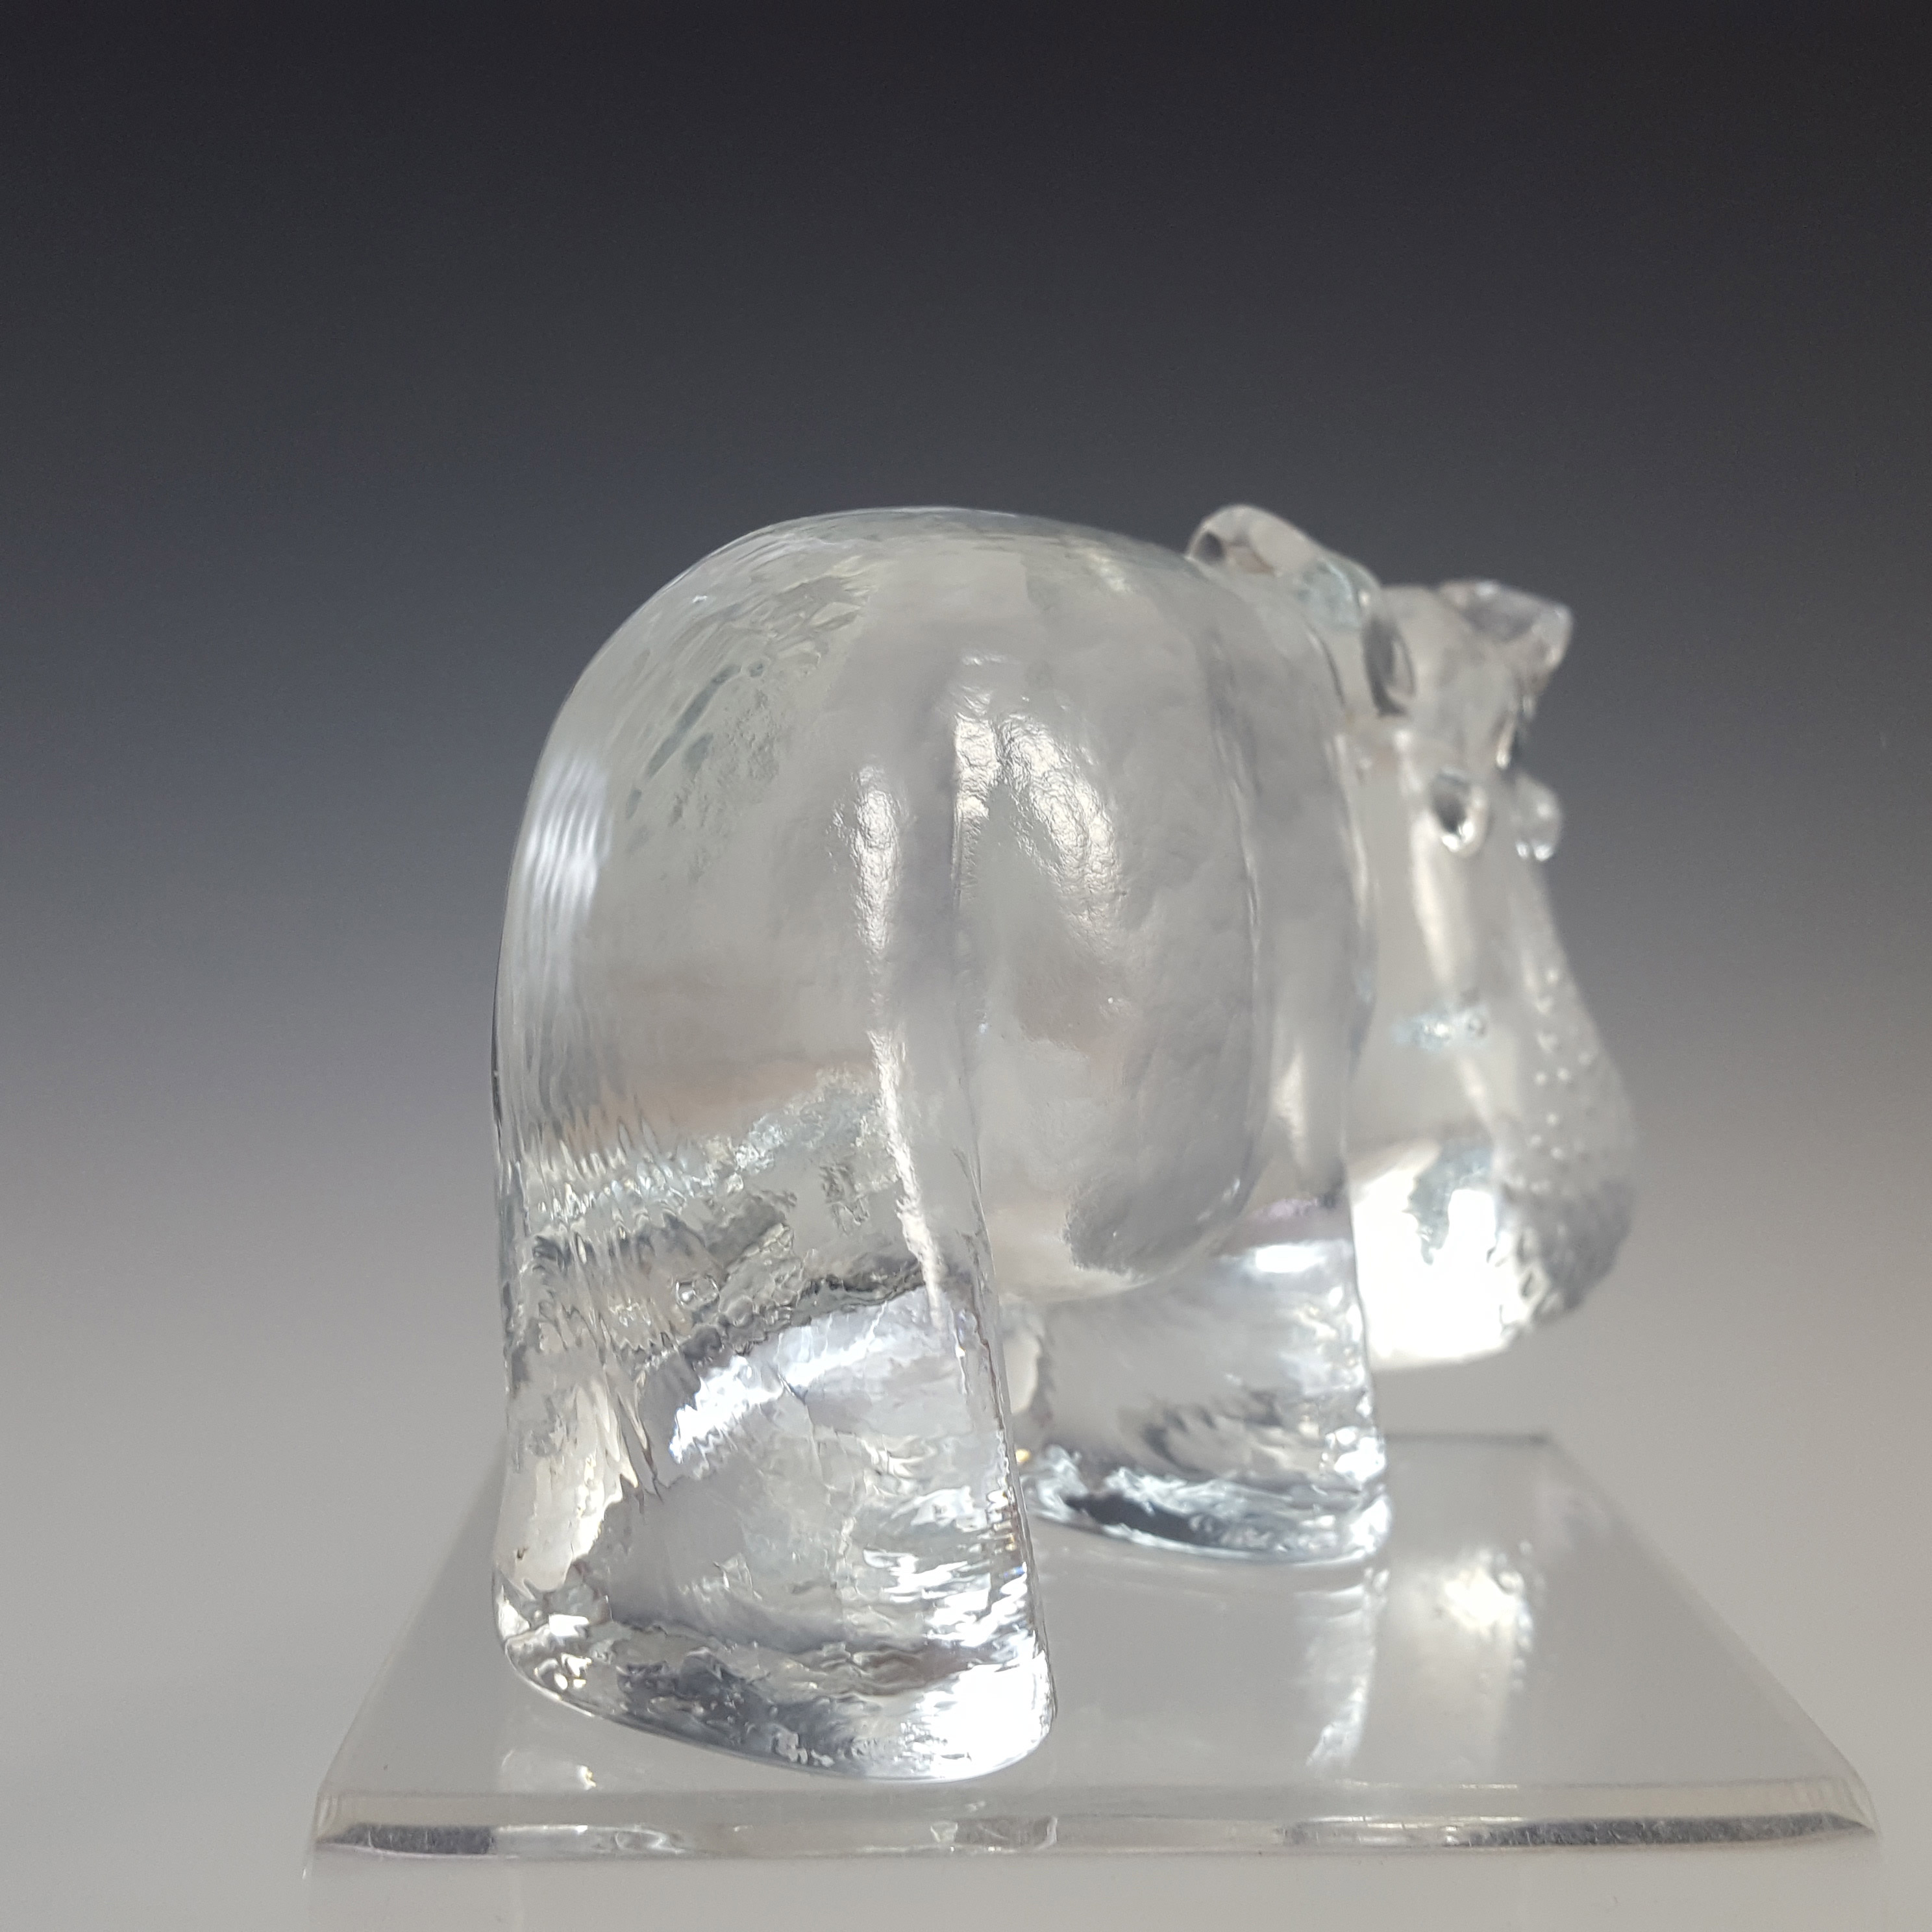 Kosta Boda Glass Hippo Sculpture - Zoo Series by Bertil Vallien - Click Image to Close